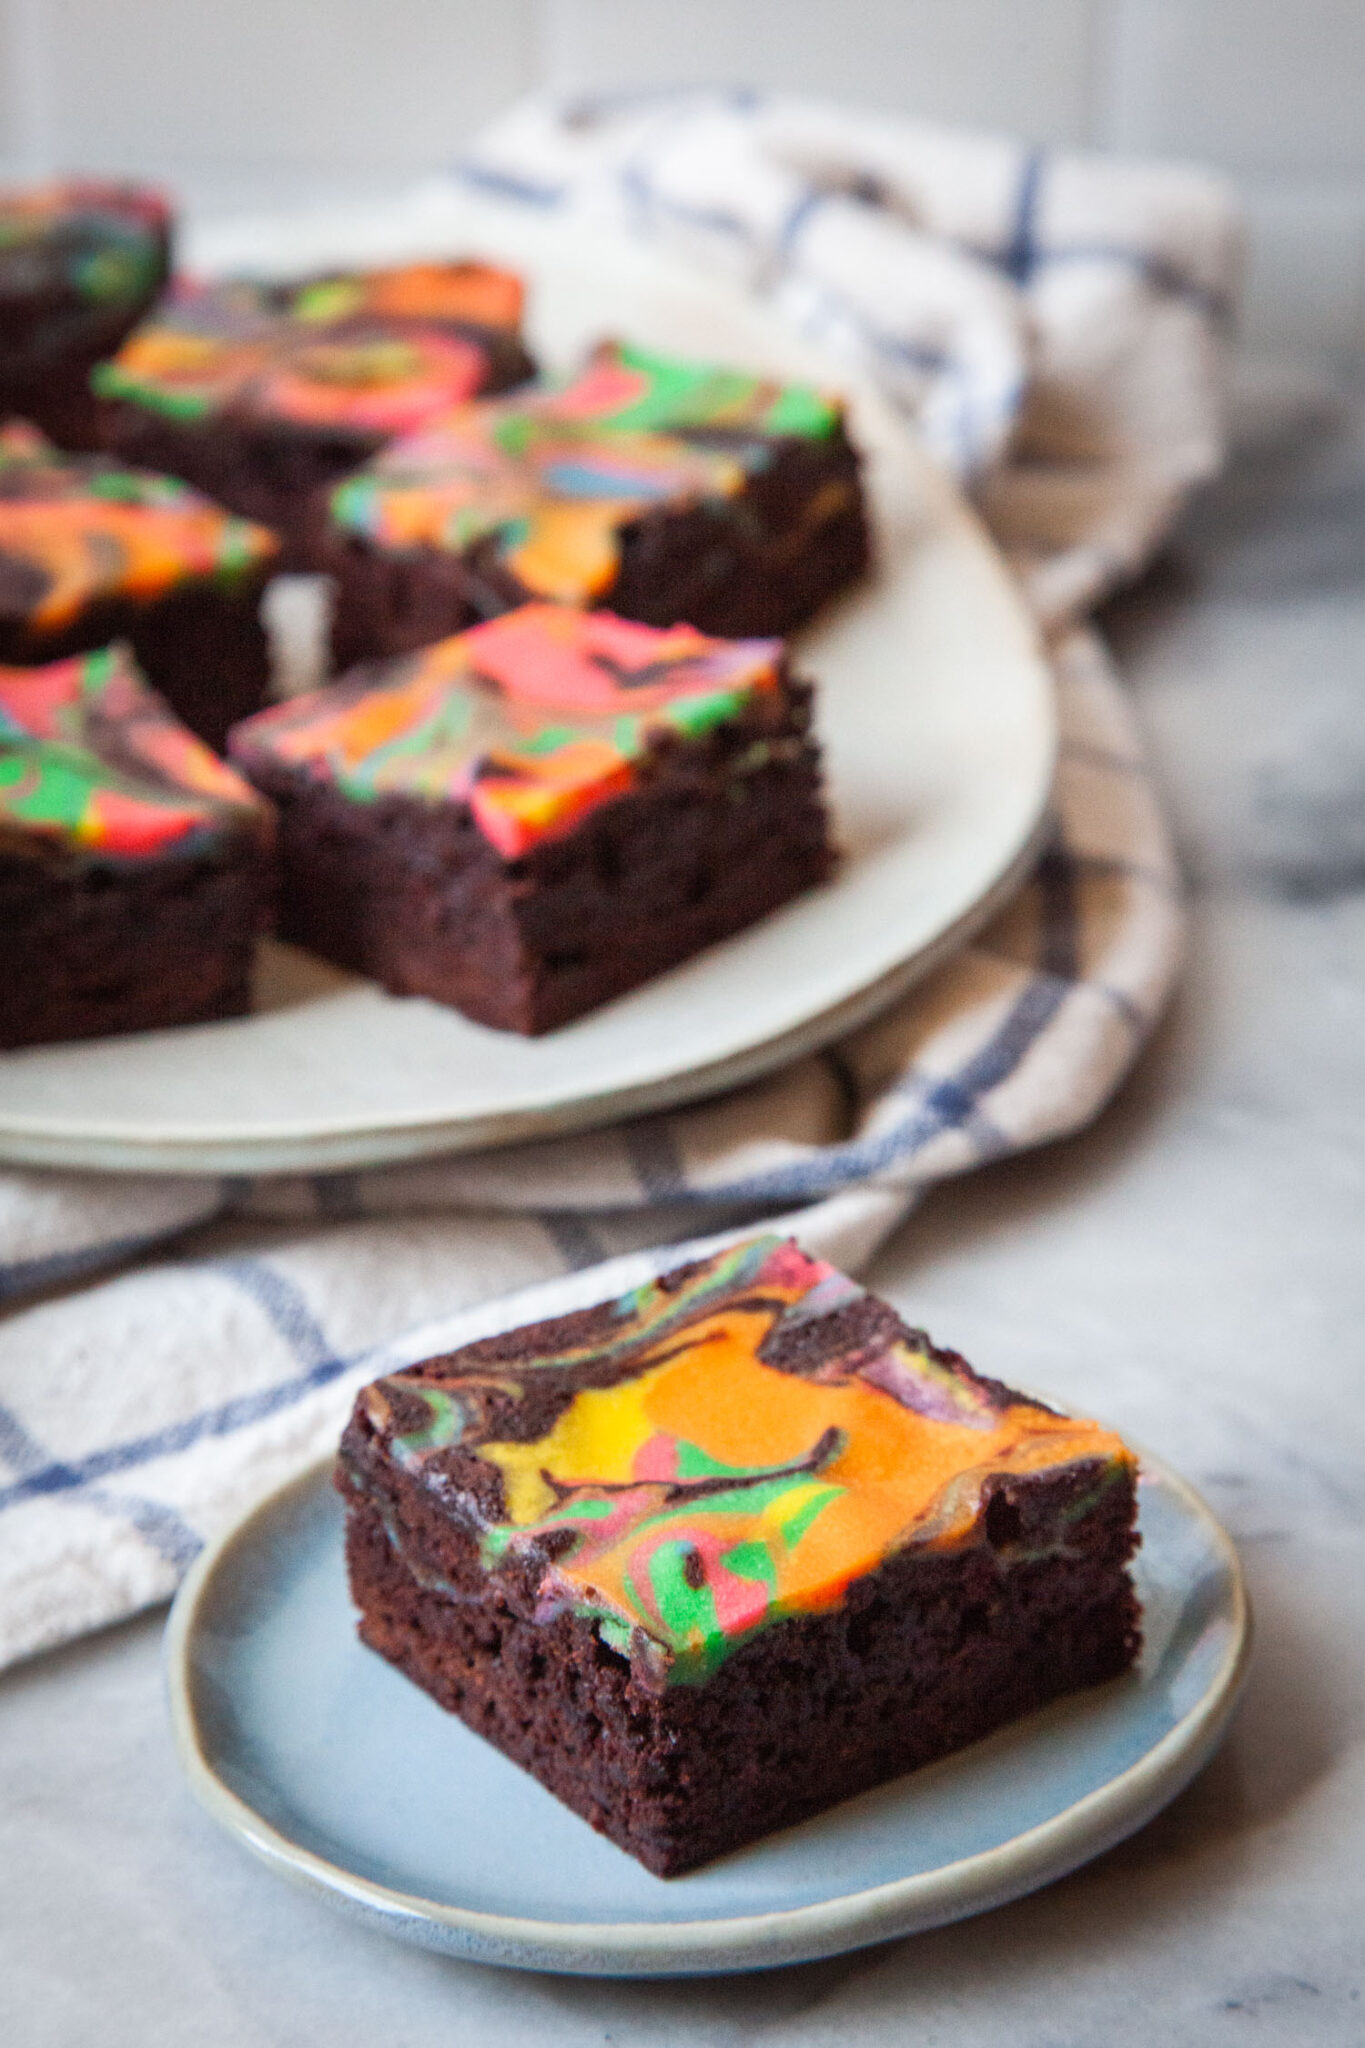 A single rainbow cheesecake brownie sitting on a small blue plate. There is an oval white plate sitting on a cloth napkin with more rainbow cheesecake brownies behind it.